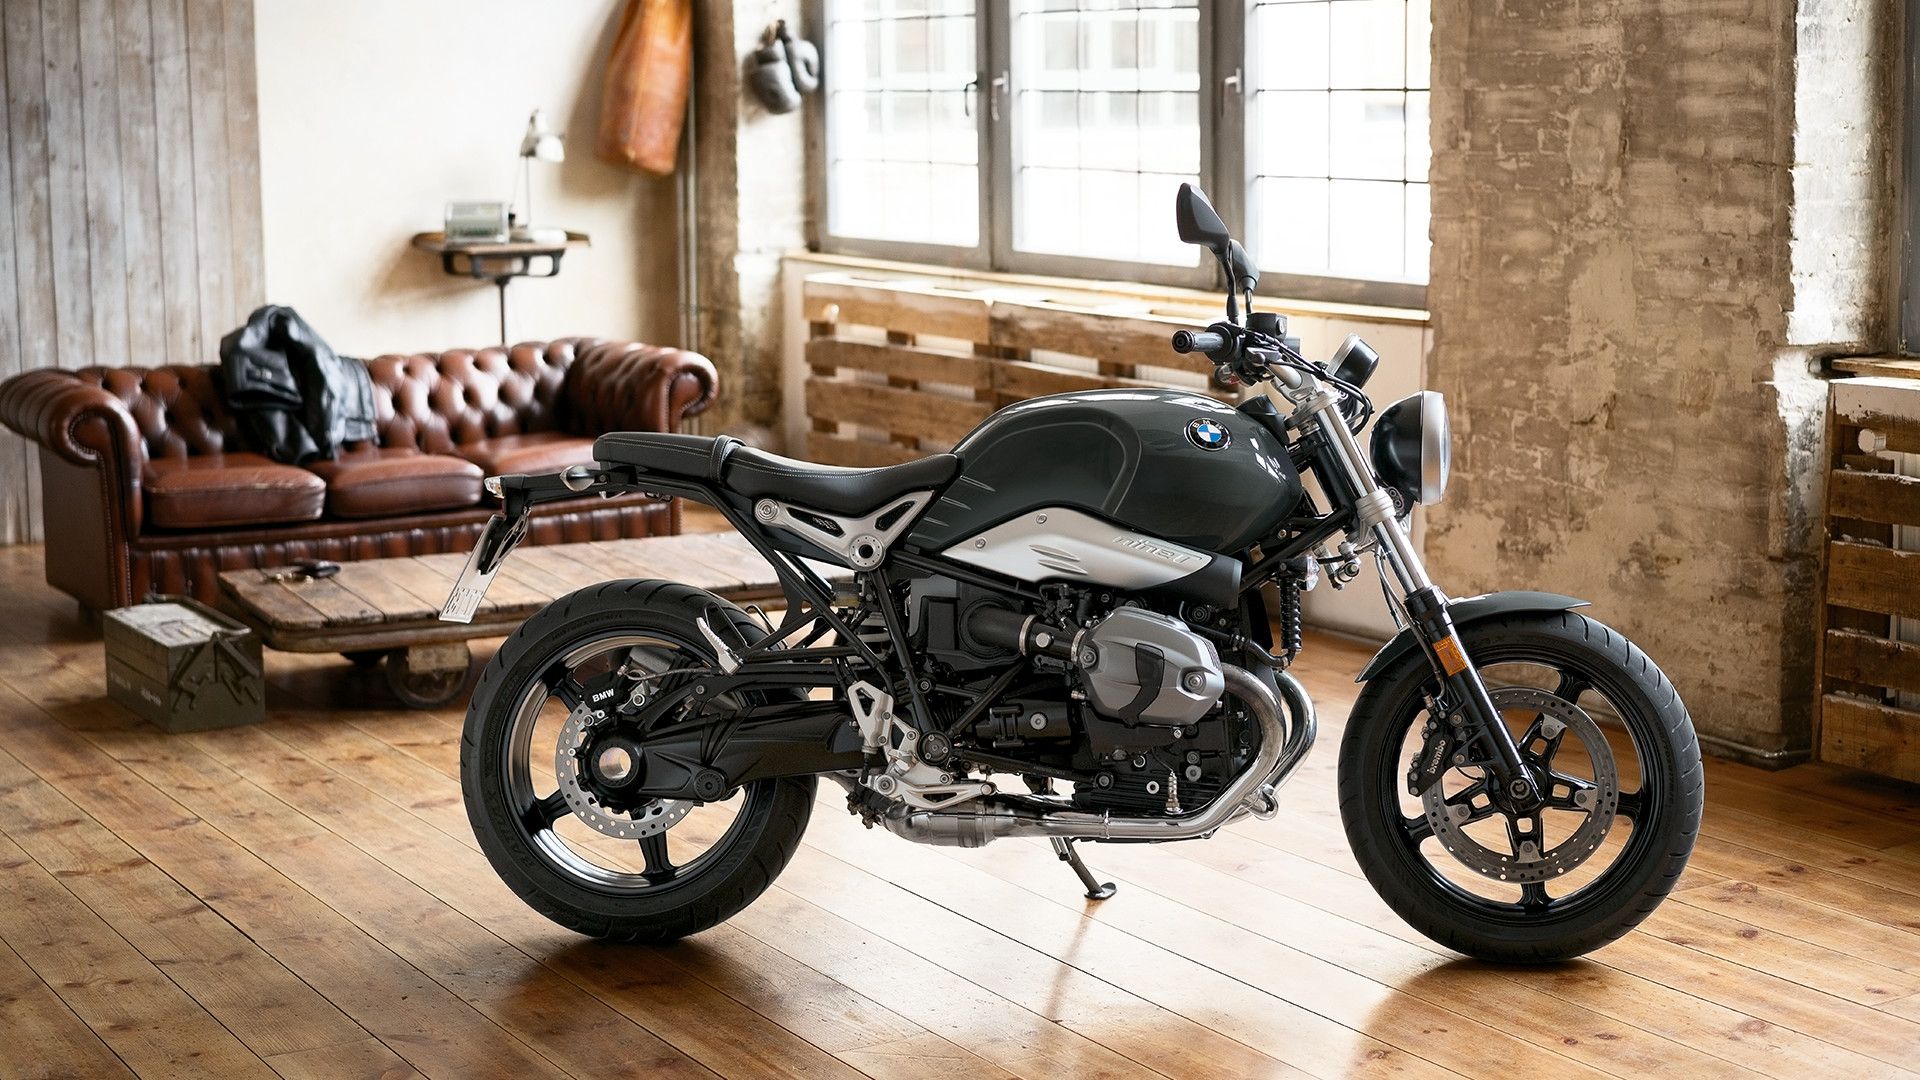 BMW Introduces New R nineT Pure and R nineT Racer